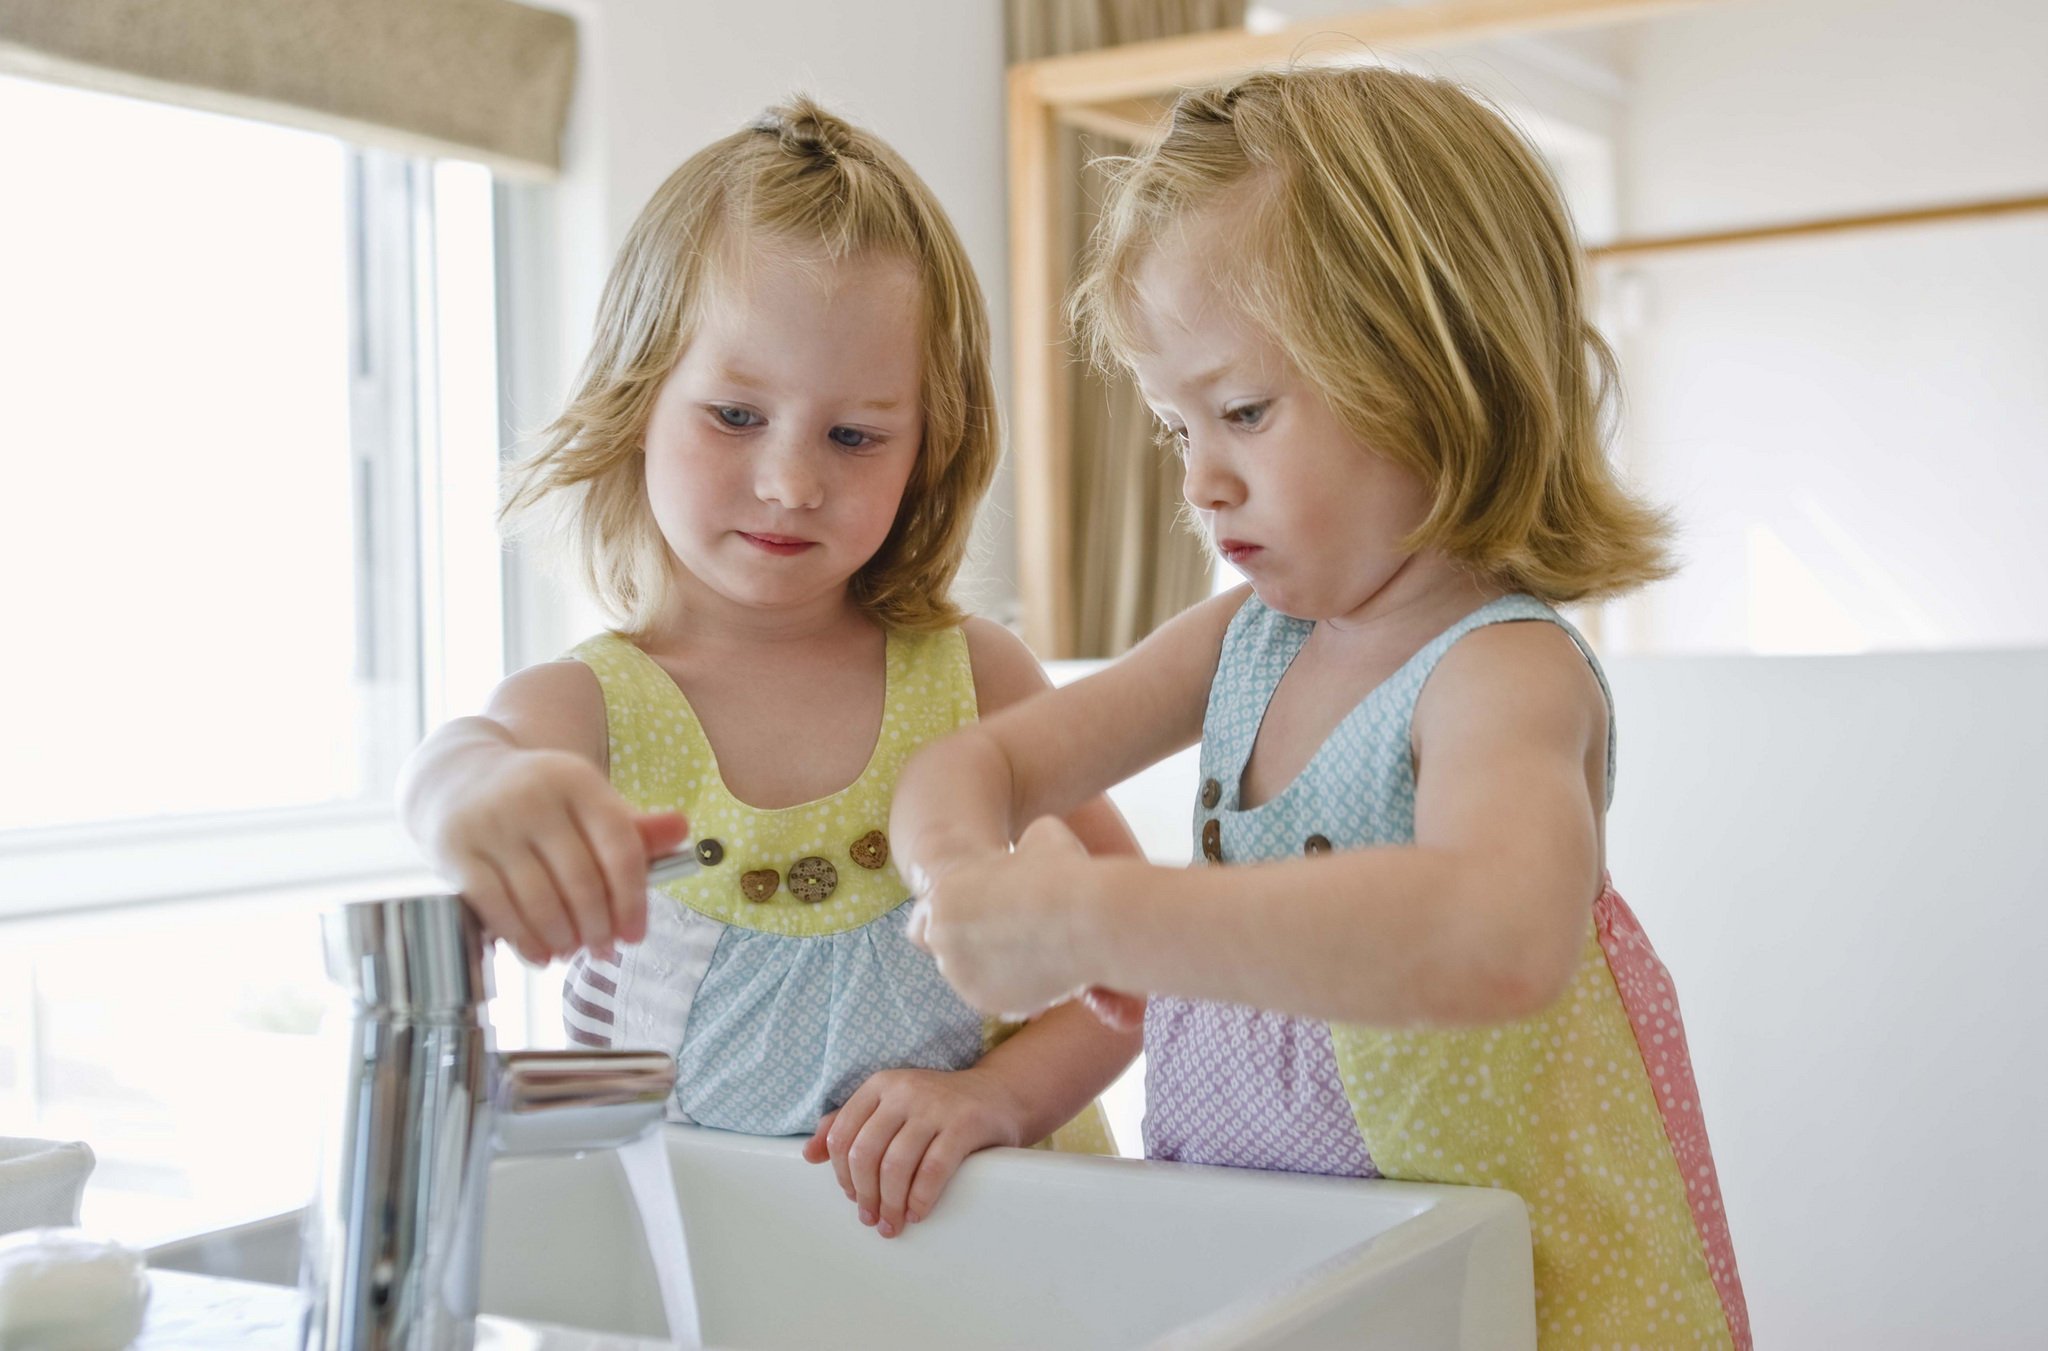 Frequent hand washing with warm water and soap can help keep your ...